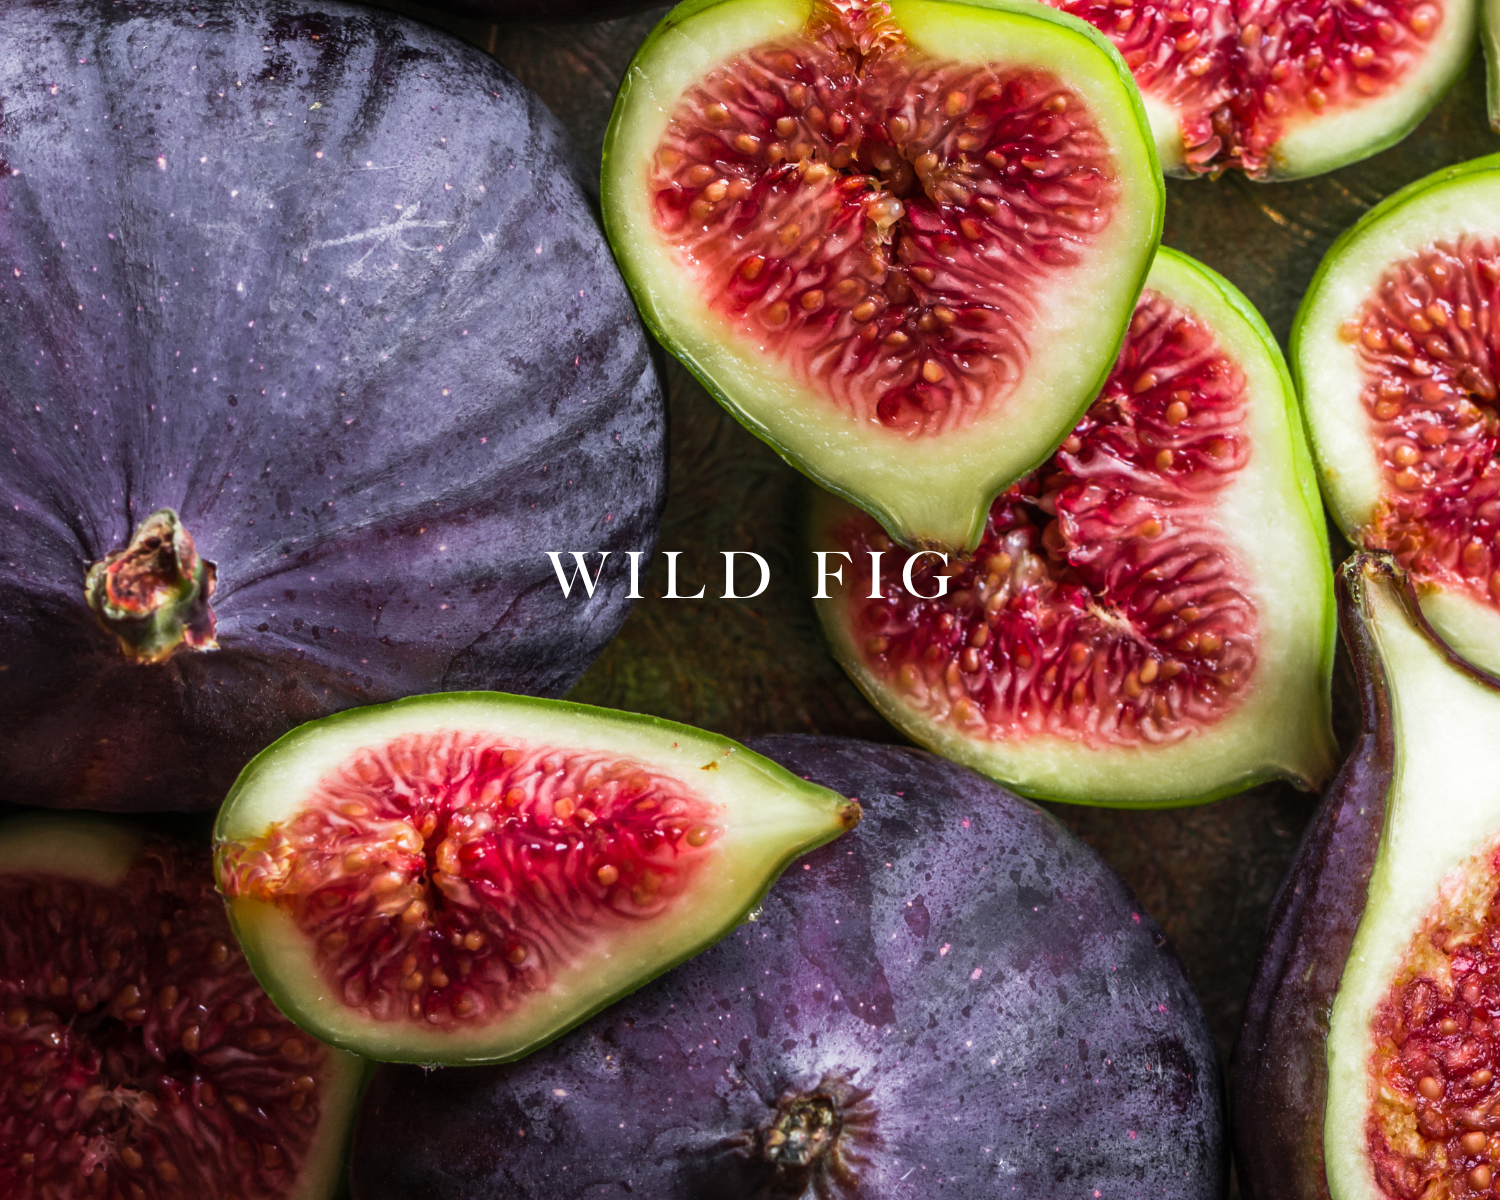 Caswell-Massey Rose Perfume for Women: image showing ripe figs to represent one of the scent notes